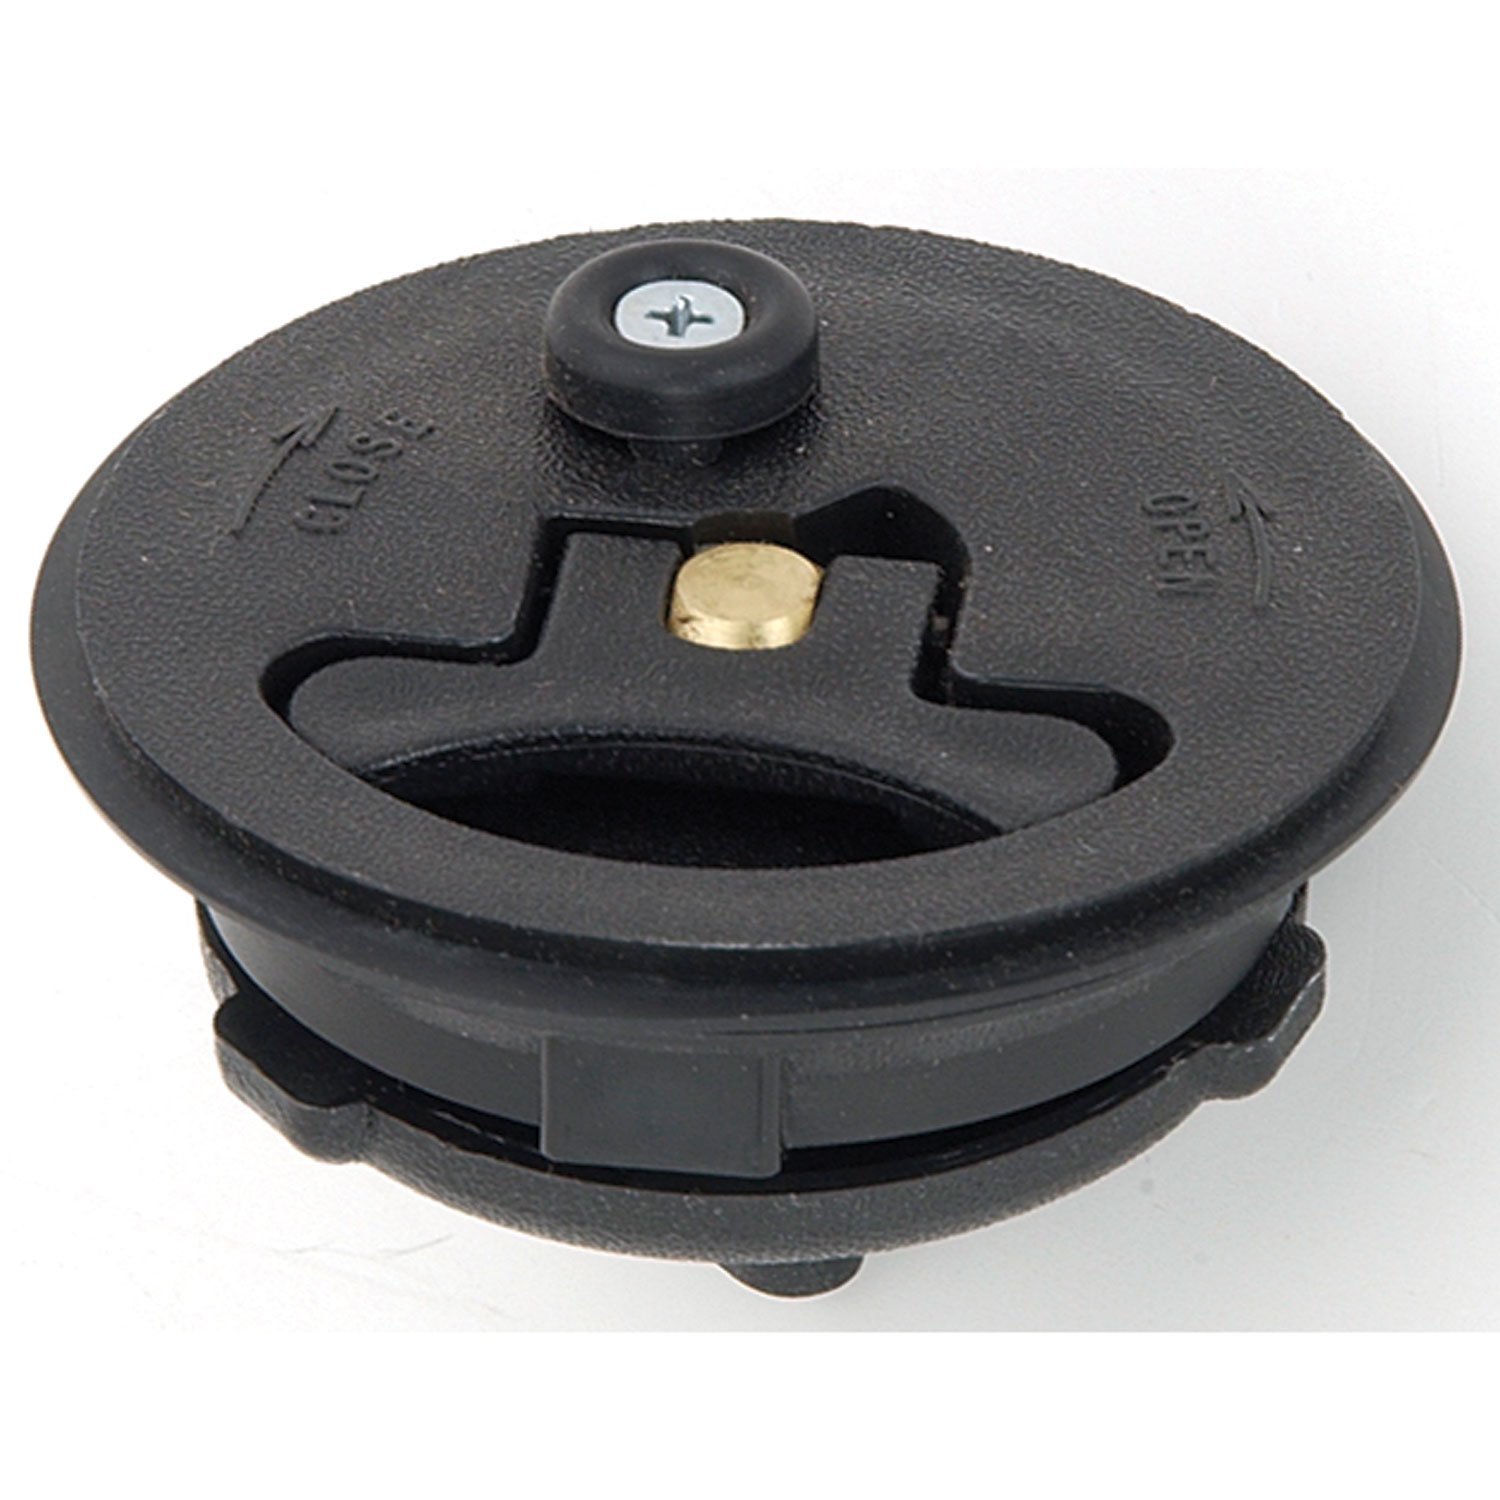 Replacement Fuel Cell Cap For 1 to 20 Gallon Fuel Cells